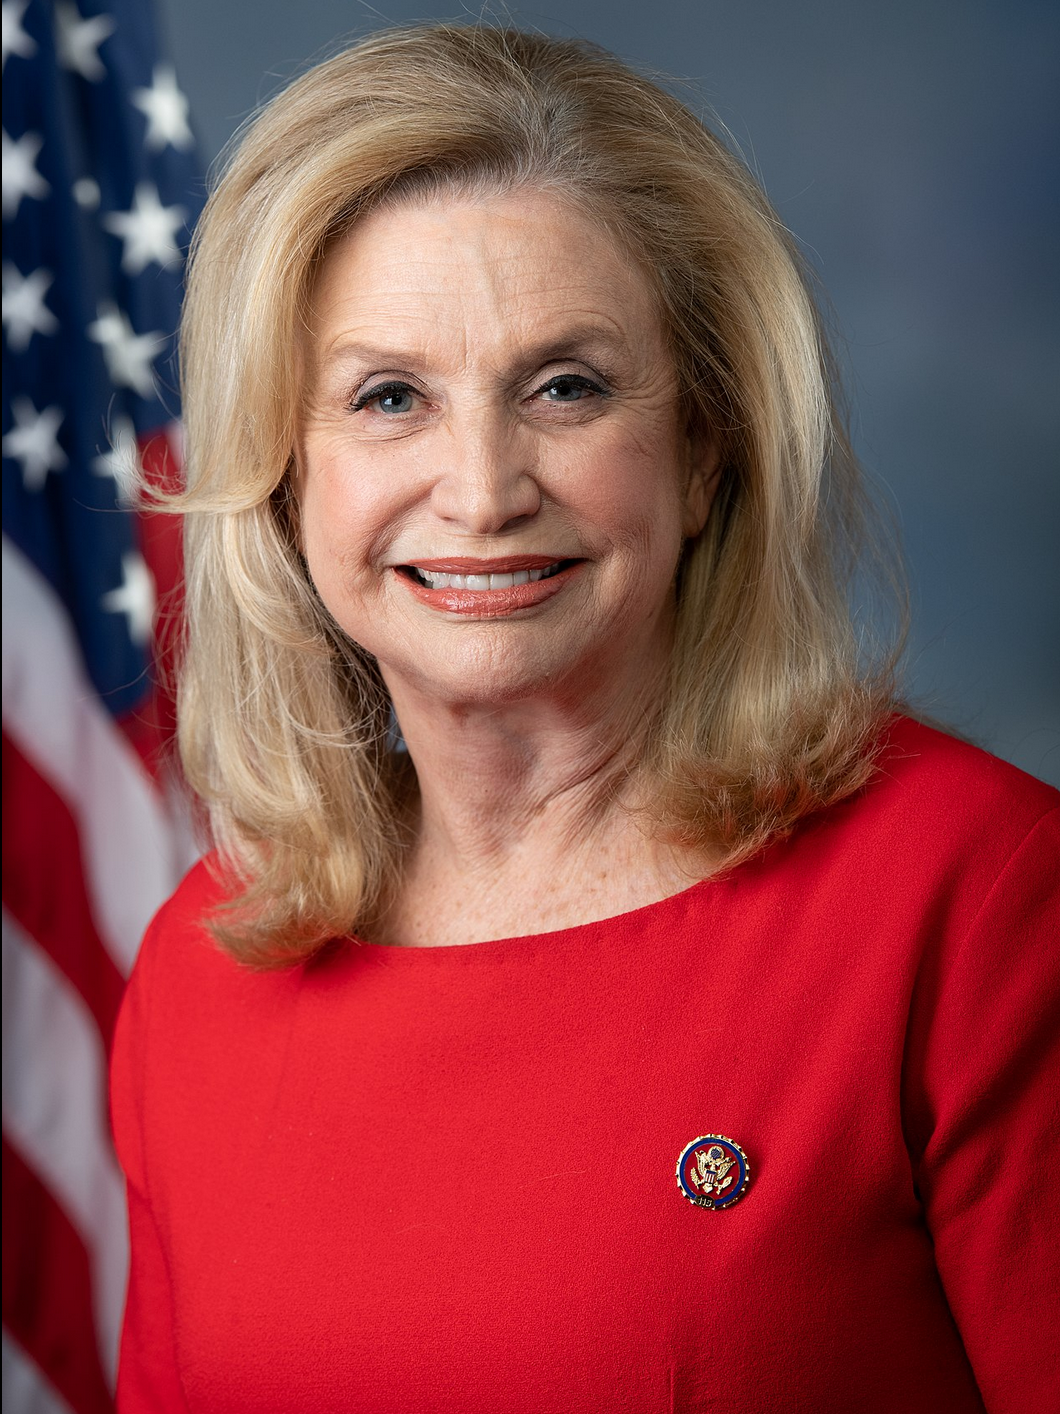 Congresswoman Carolyn Maloney is the Chairwoman of the House Oversight Committee